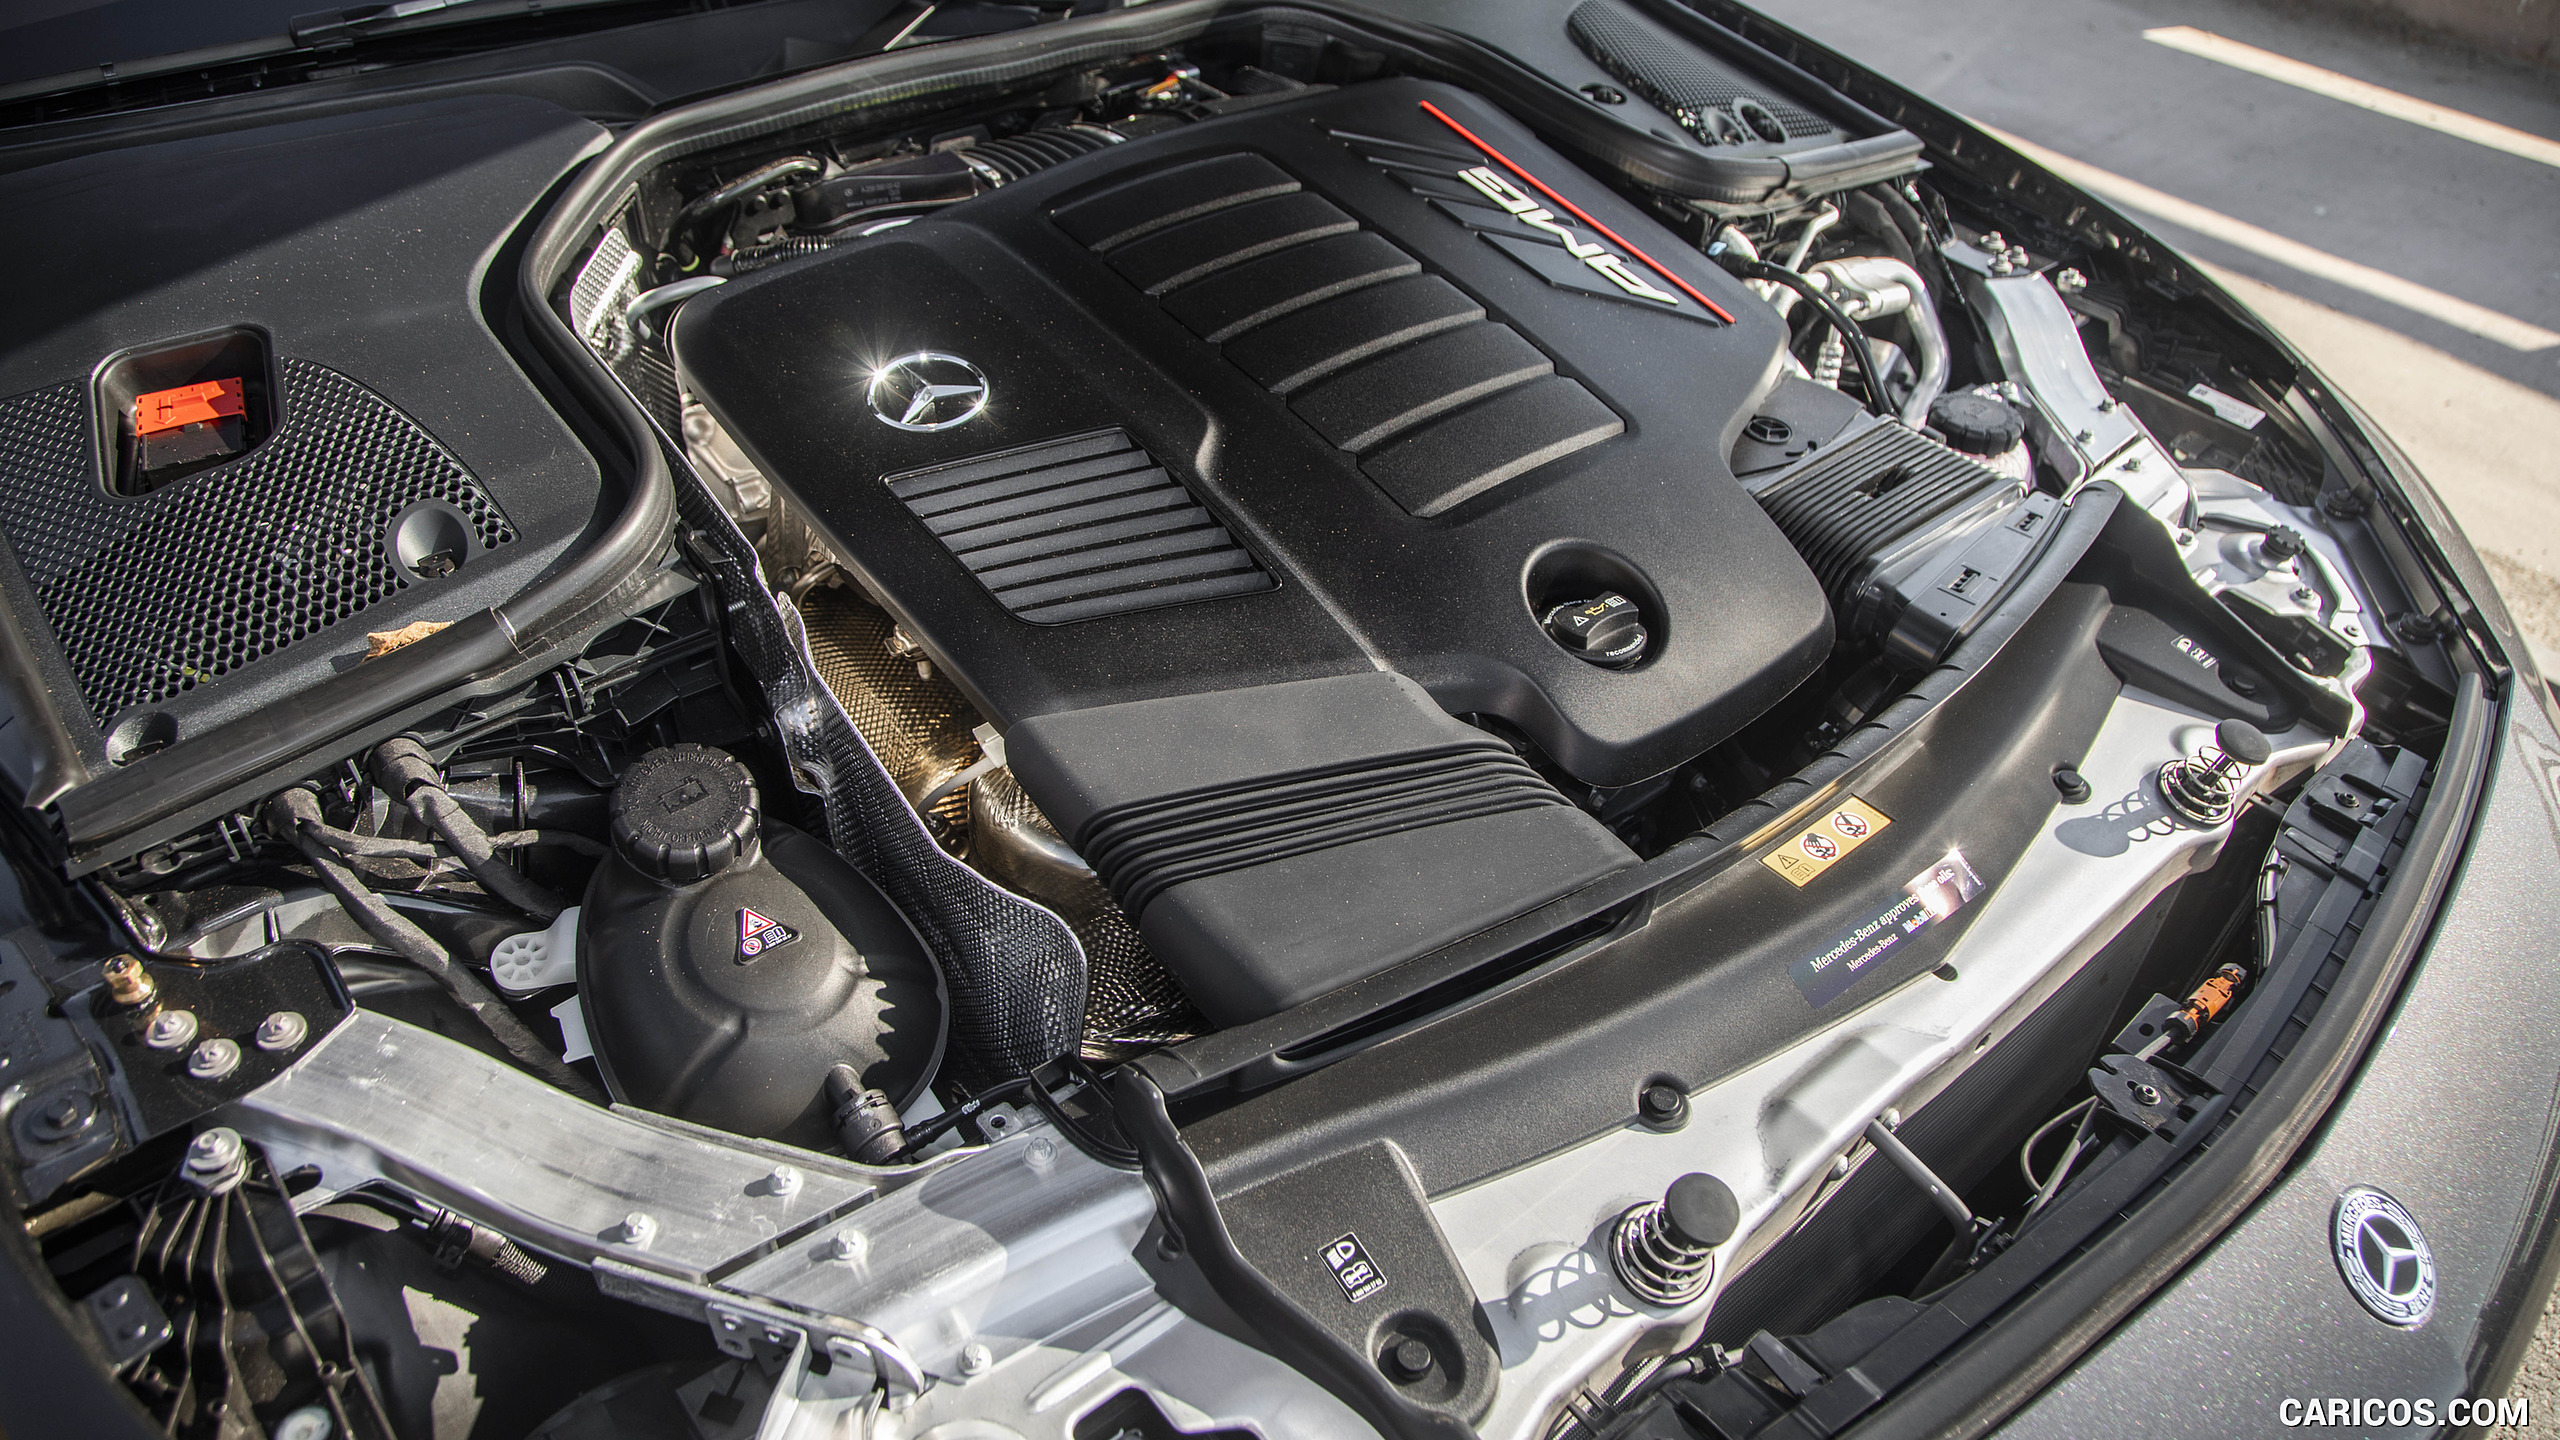 2019 Mercedes-AMG CLS 53 4MATIC+ (US-Spec) - Engine, #64 of 84